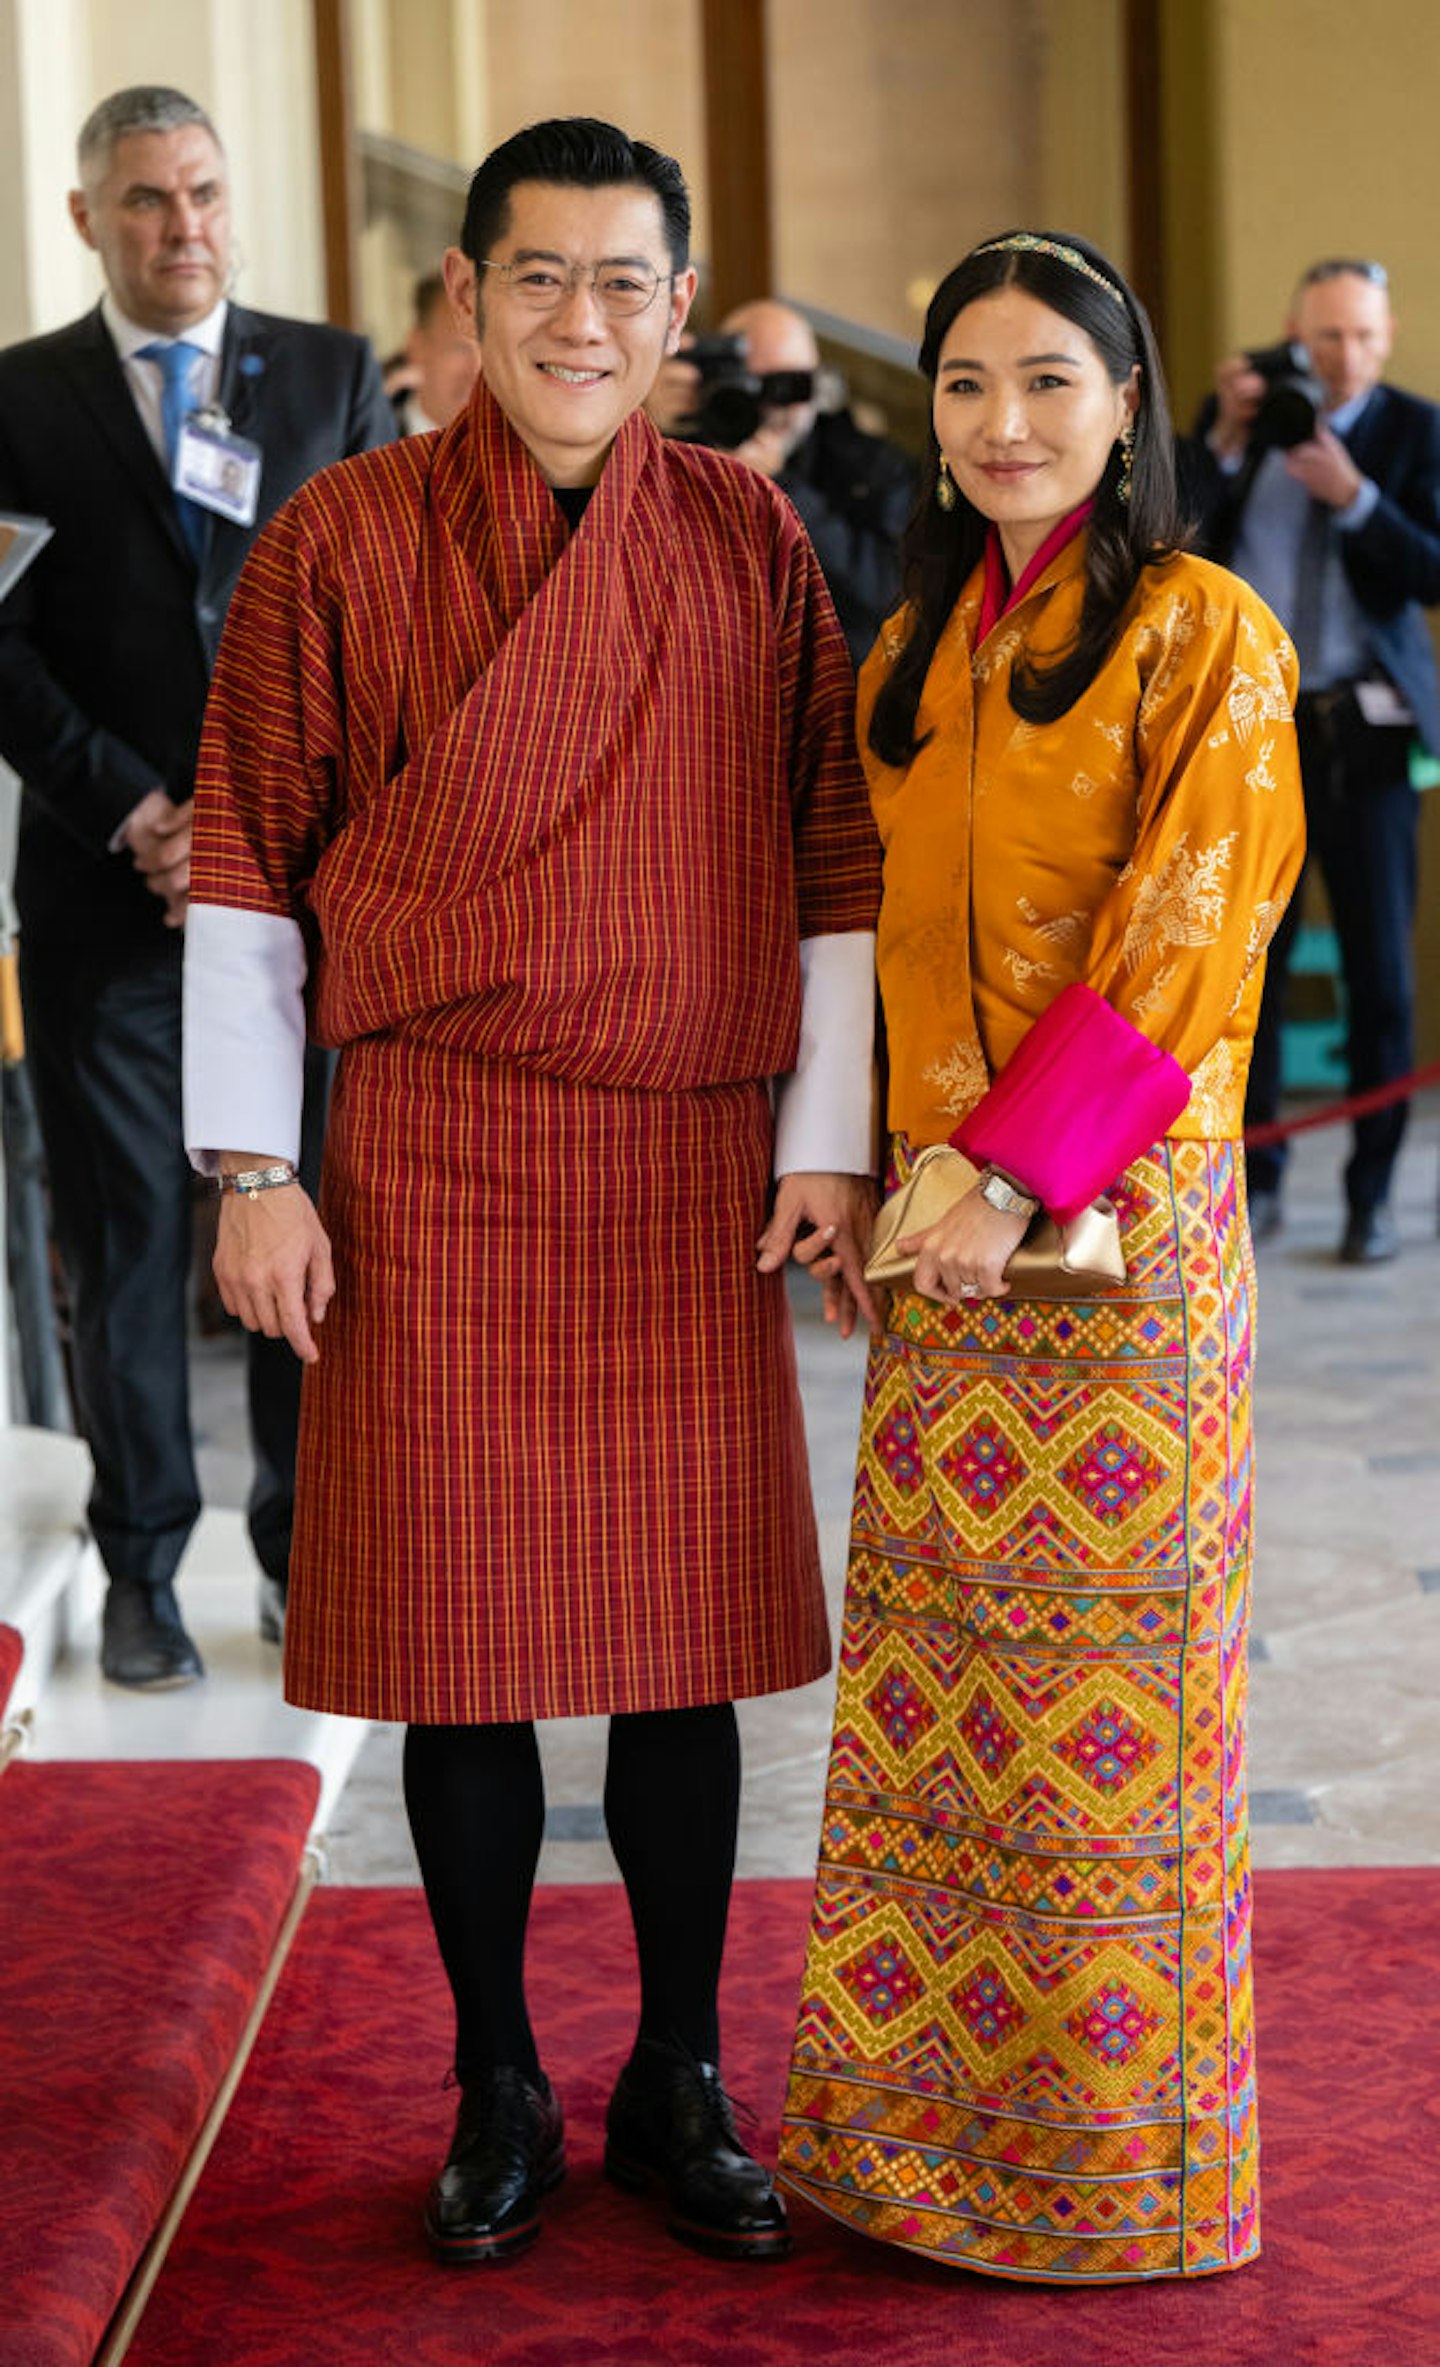 Queen Jetsun Pema of Bhutan and King Jigme Khesar Namgyel Wangchuck attend the Coronation Reception For Overseas Guests at Buckingham Palace